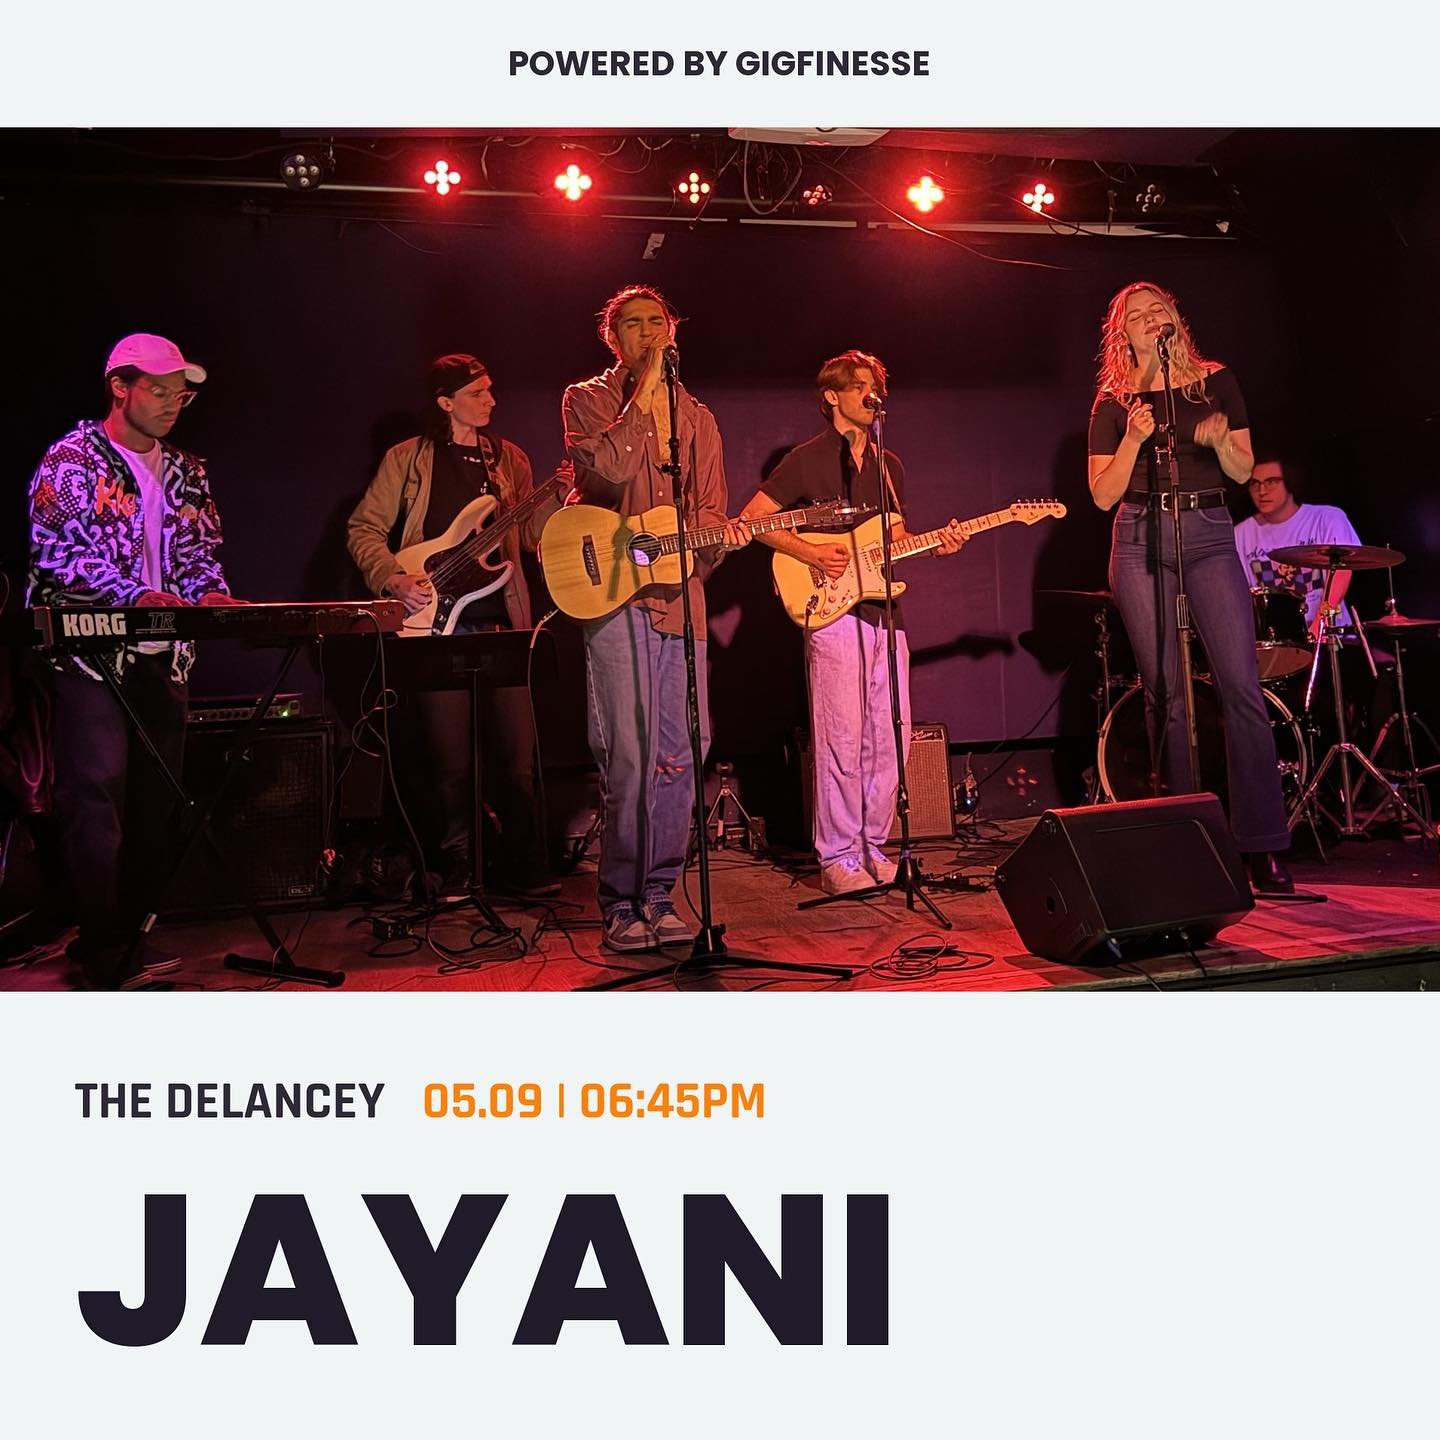 HEY YALL! Thank you for rocking with us @pianosnyc last weekend!!!! Catch us 5/9 at the Delancey!!! Featuring some more talent with @winnspencerham @magill.music @chase_eck and friends. Don&rsquo;t want to miss this one. May be the last show before t